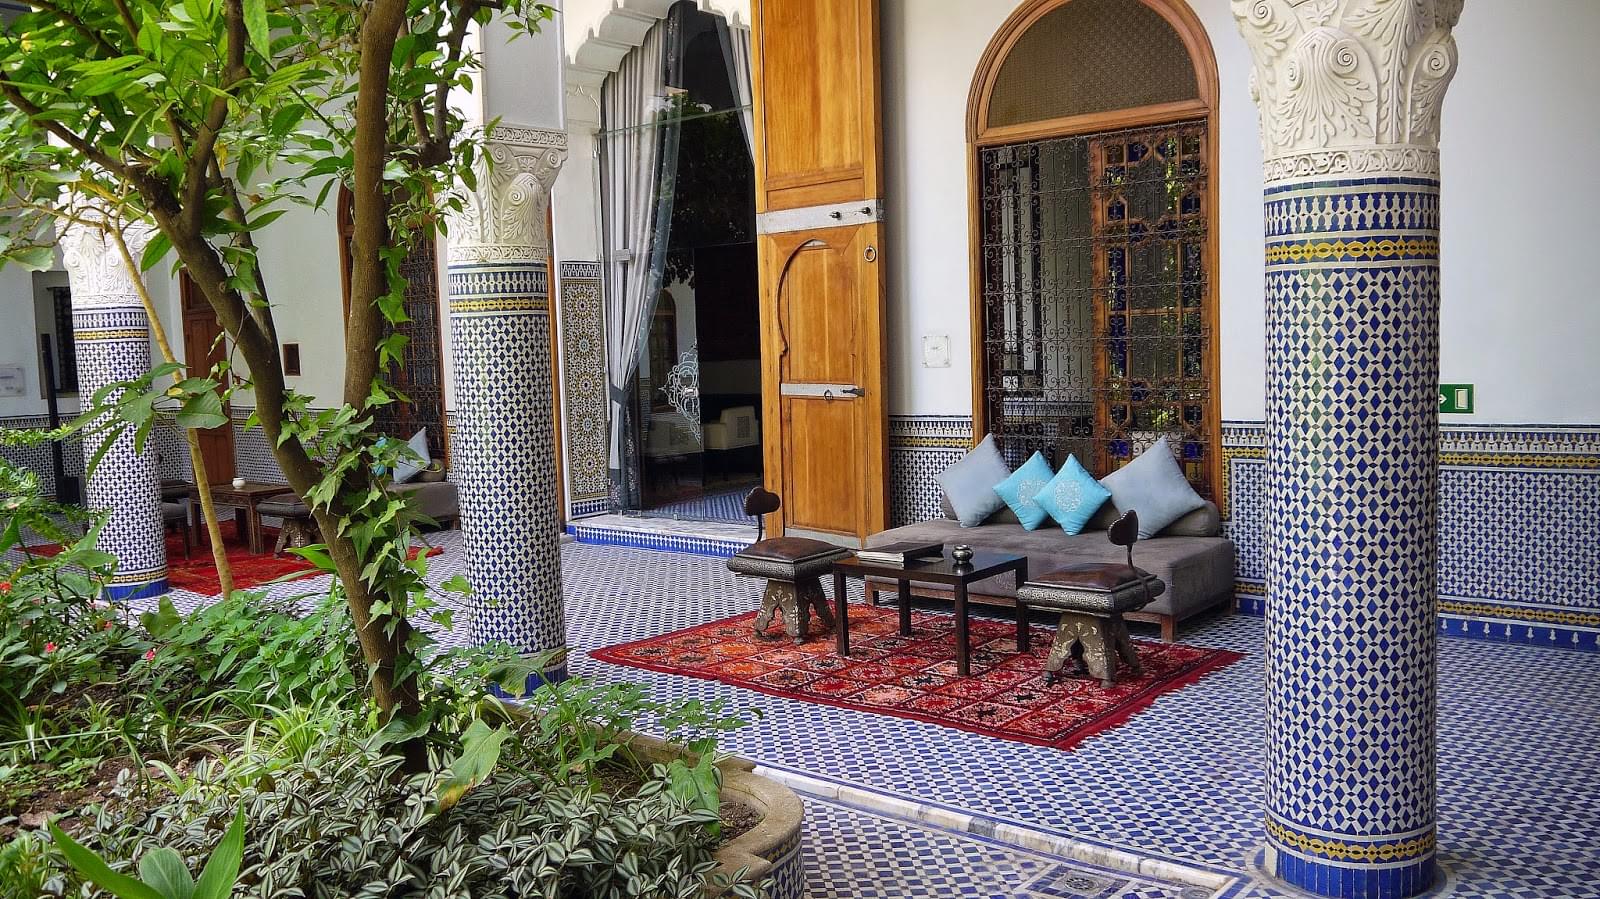 1581195859 515 The most distinguished and charming hotels in the Moroccan city - The most distinguished and charming hotels in the Moroccan city of Fez